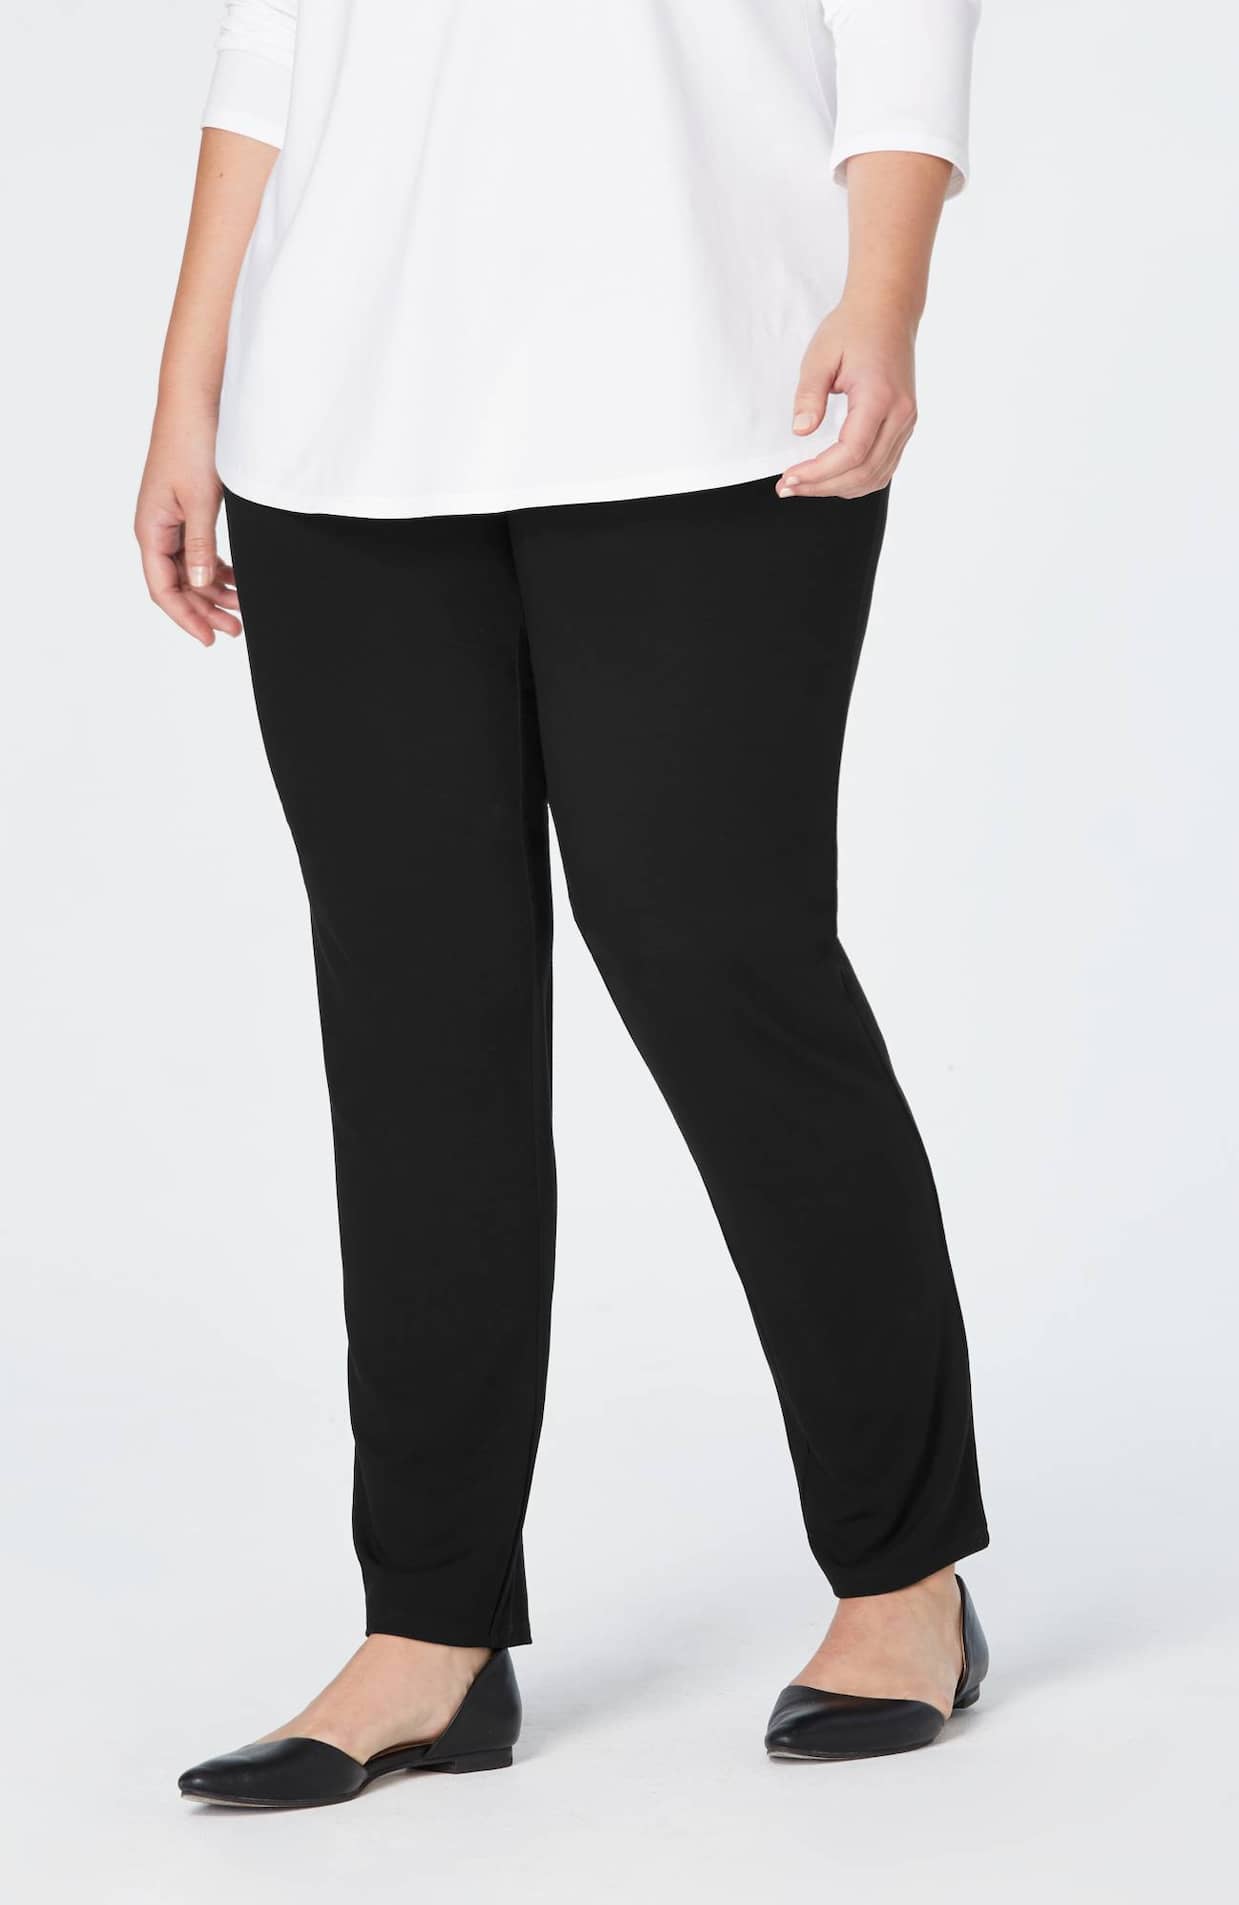 J.Jill Pants Women LARGE Black Wearever Collection Smooth Fit Barely  Bootcut - $34 - From Taylor